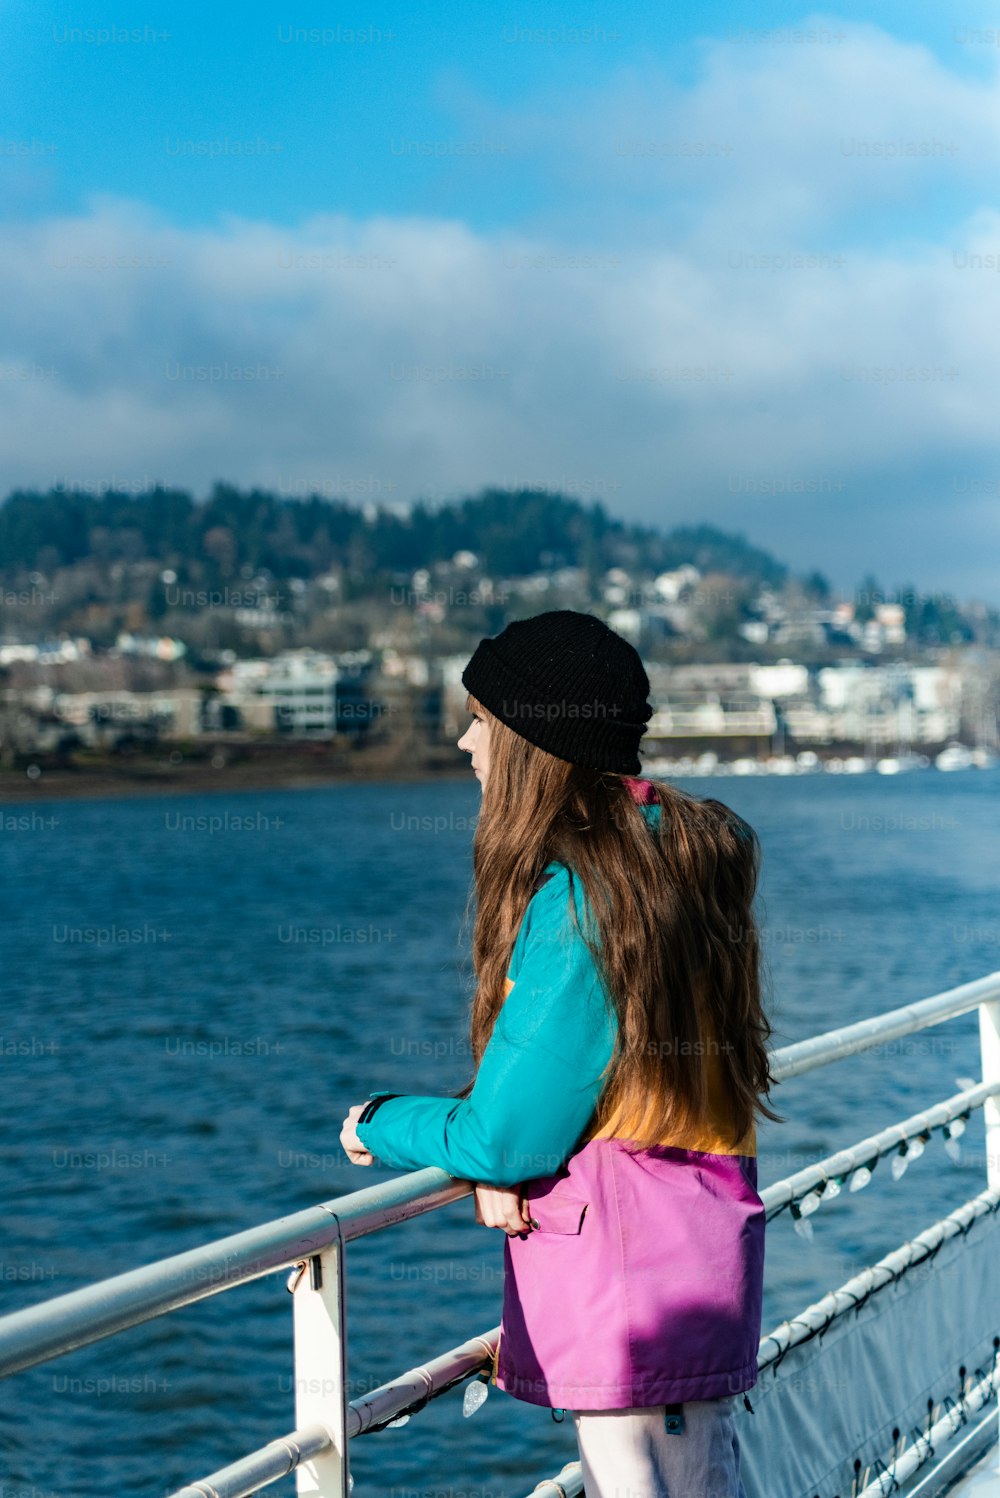 two young girls looking out over a body of water